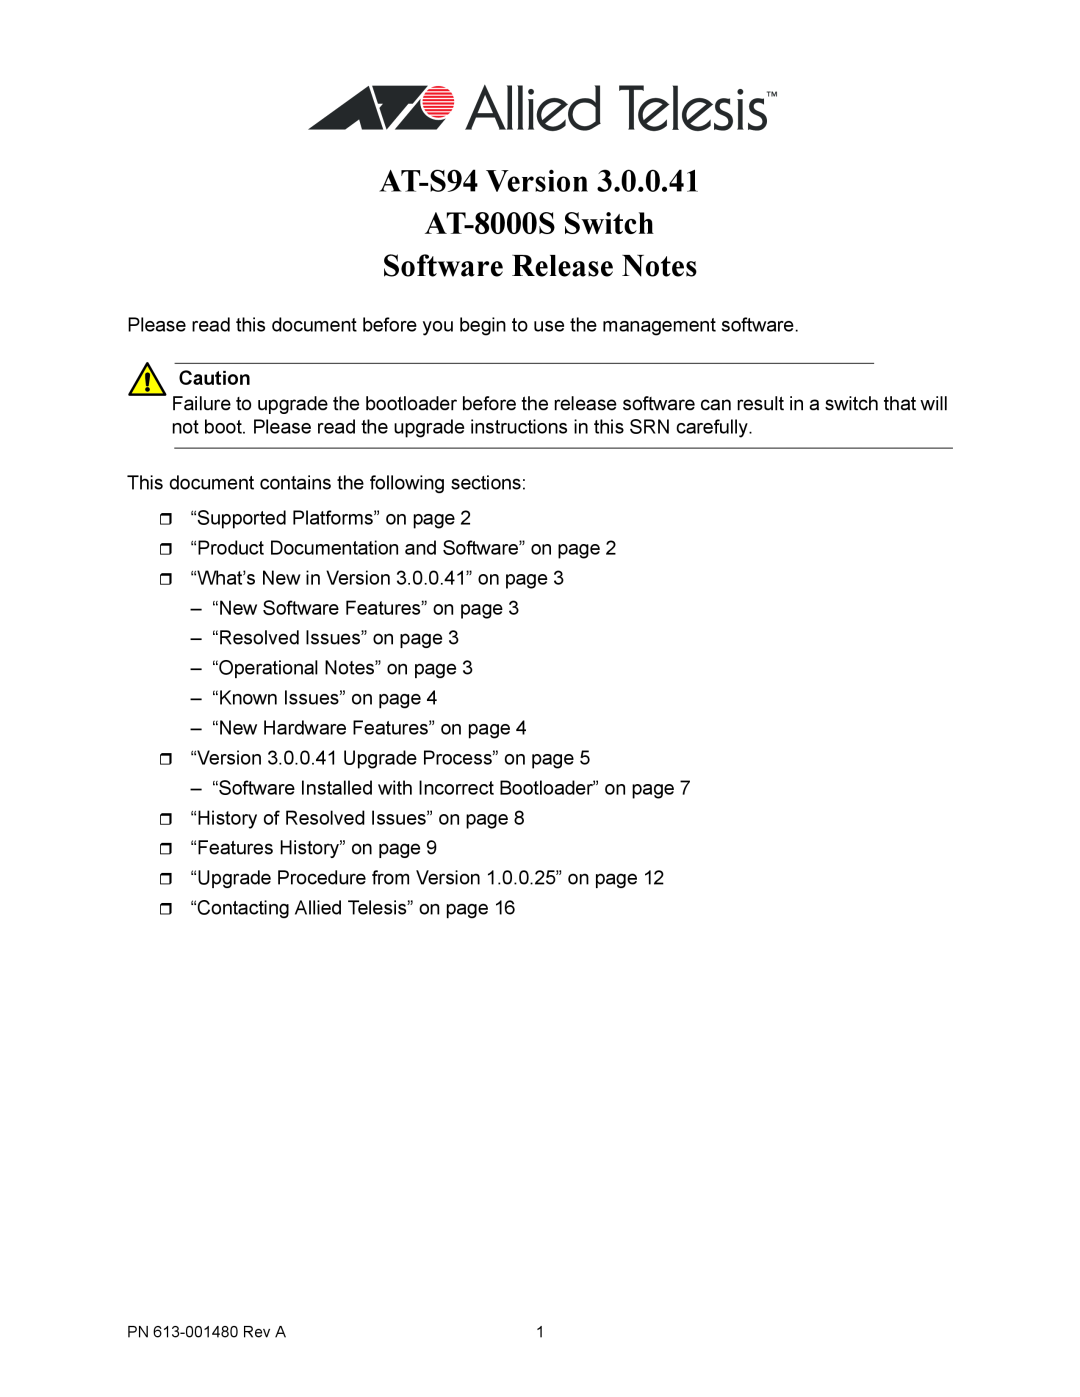 Allied Telesis 613-001480 manual AT-S94 Version AT-8000S Switch Software Release Notes 